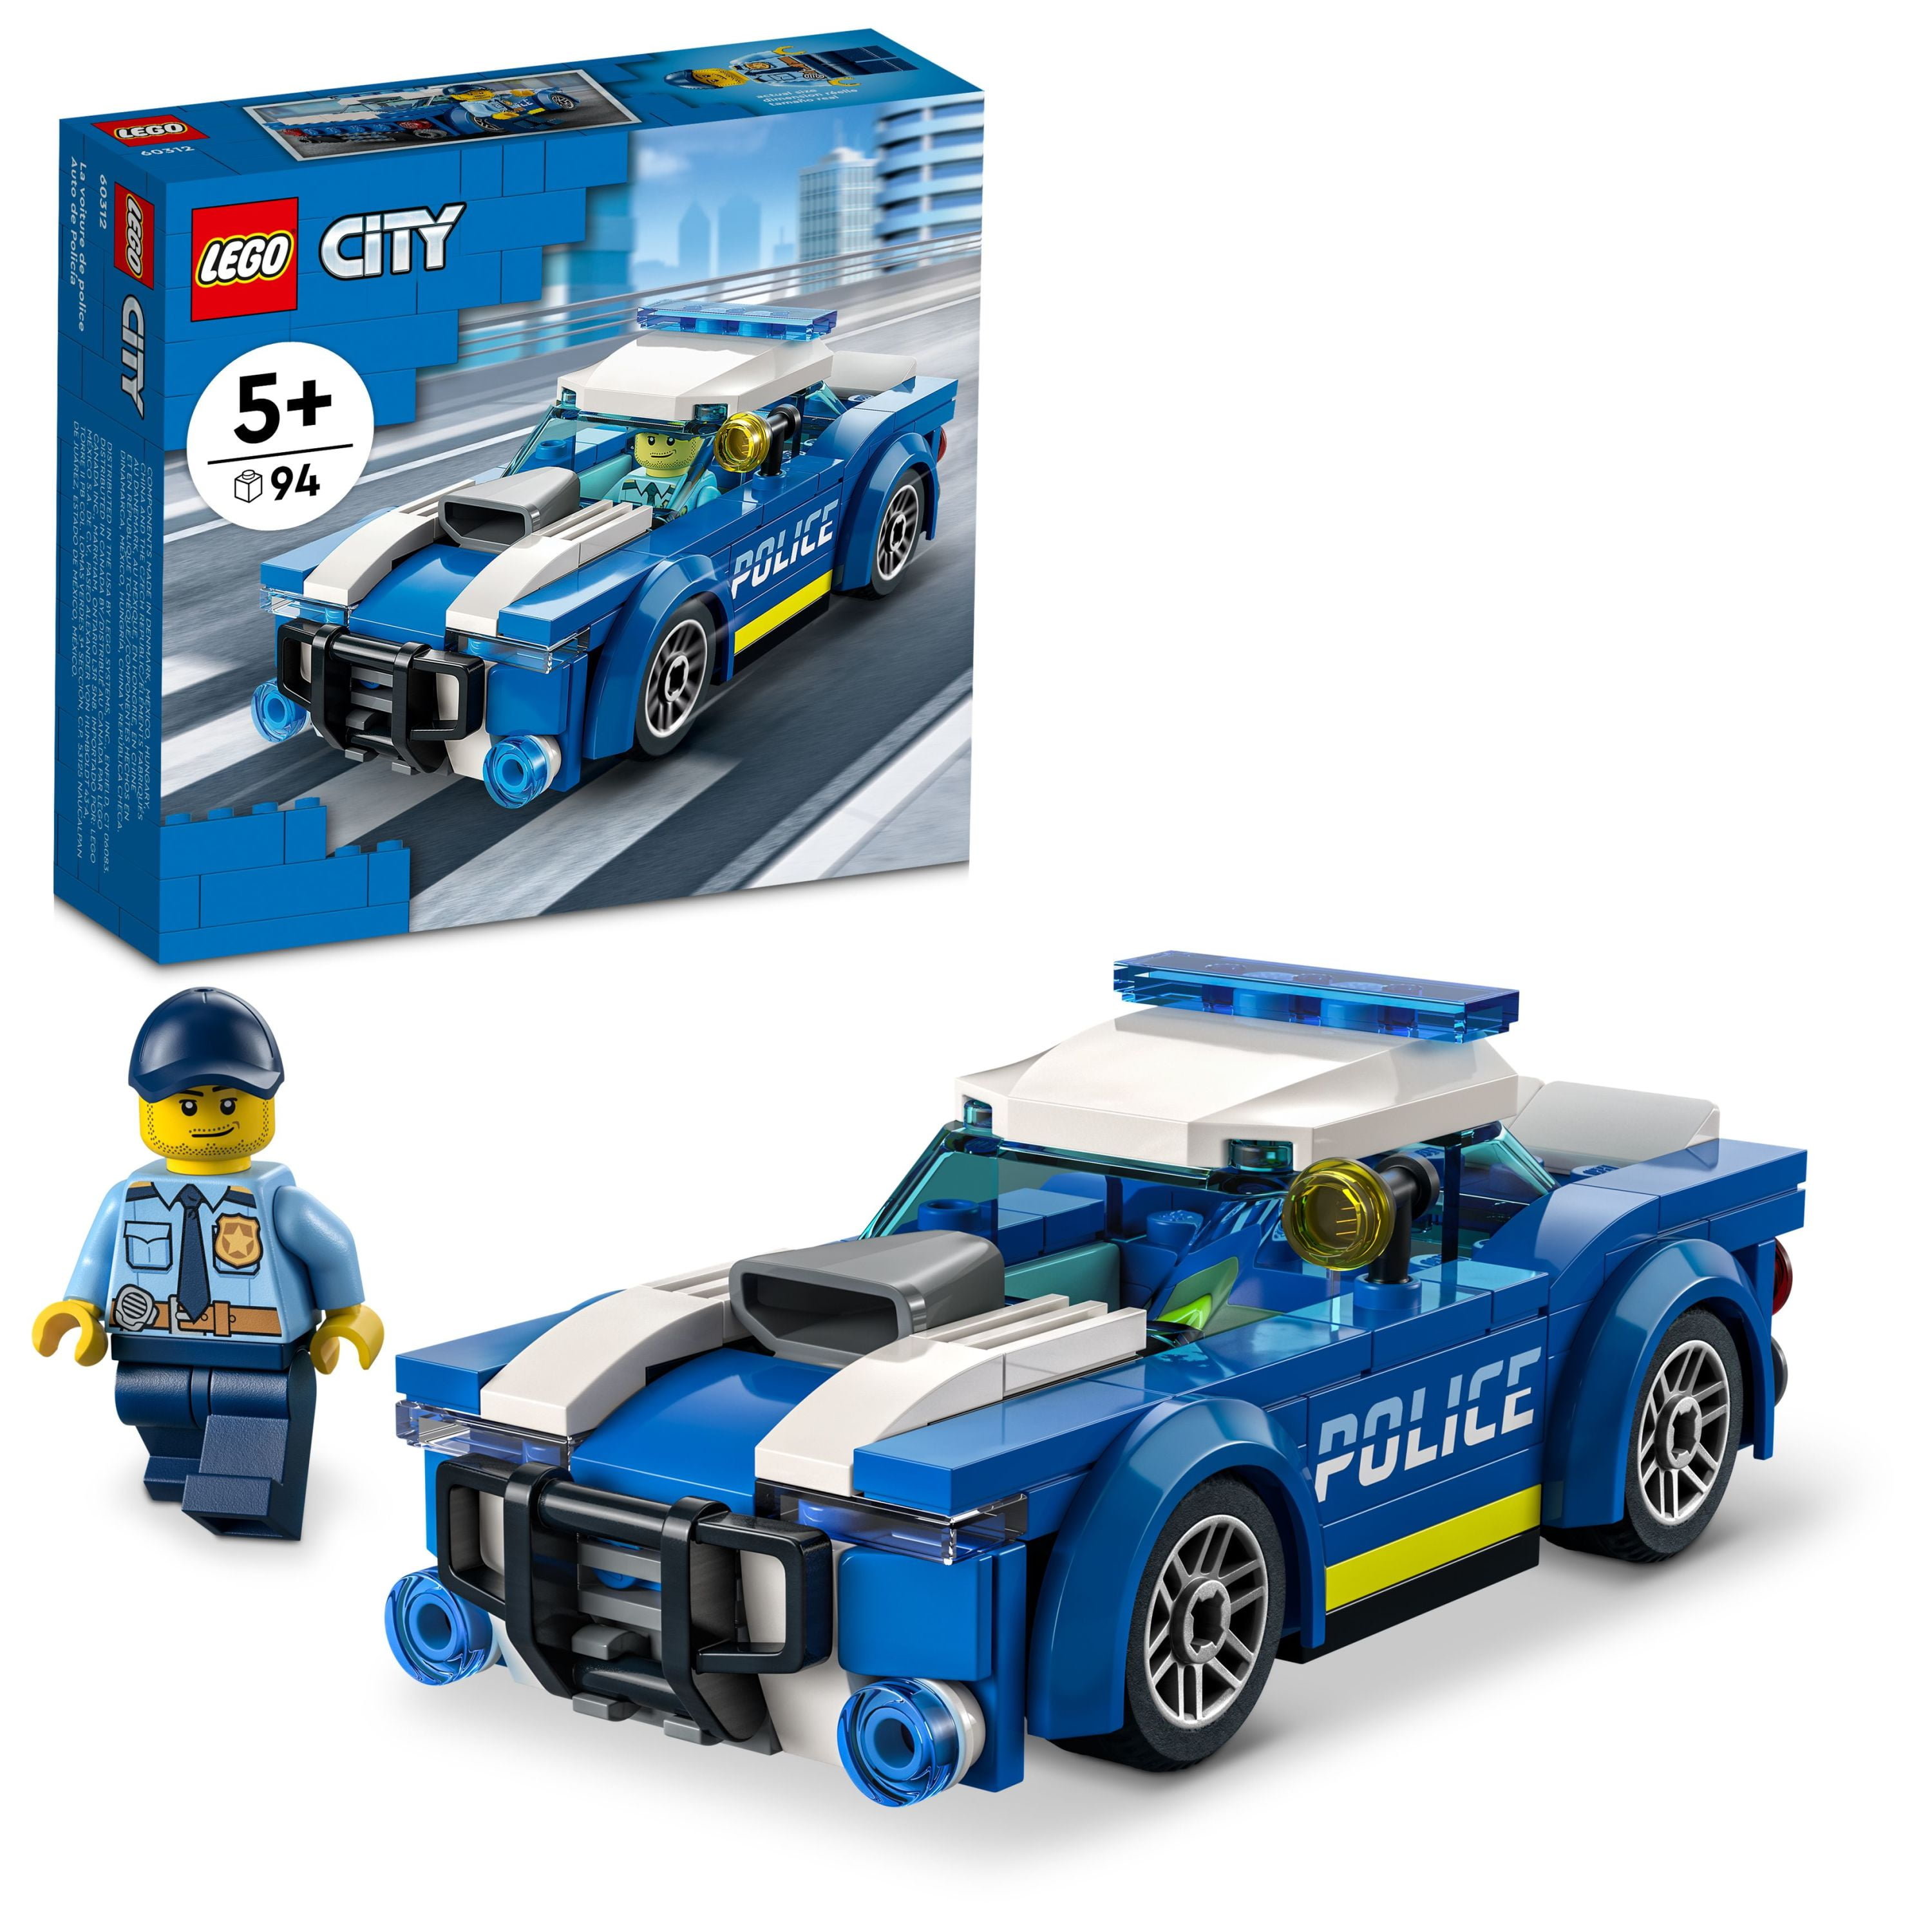 Toezicht houden Condenseren moreel LEGO City Police Car Toy 60312 for Kids 5 plus Years Old with Officer  Minifigure, Small Gift Idea, Adventures Series, Chase Vehicle Building Set  - Walmart.com